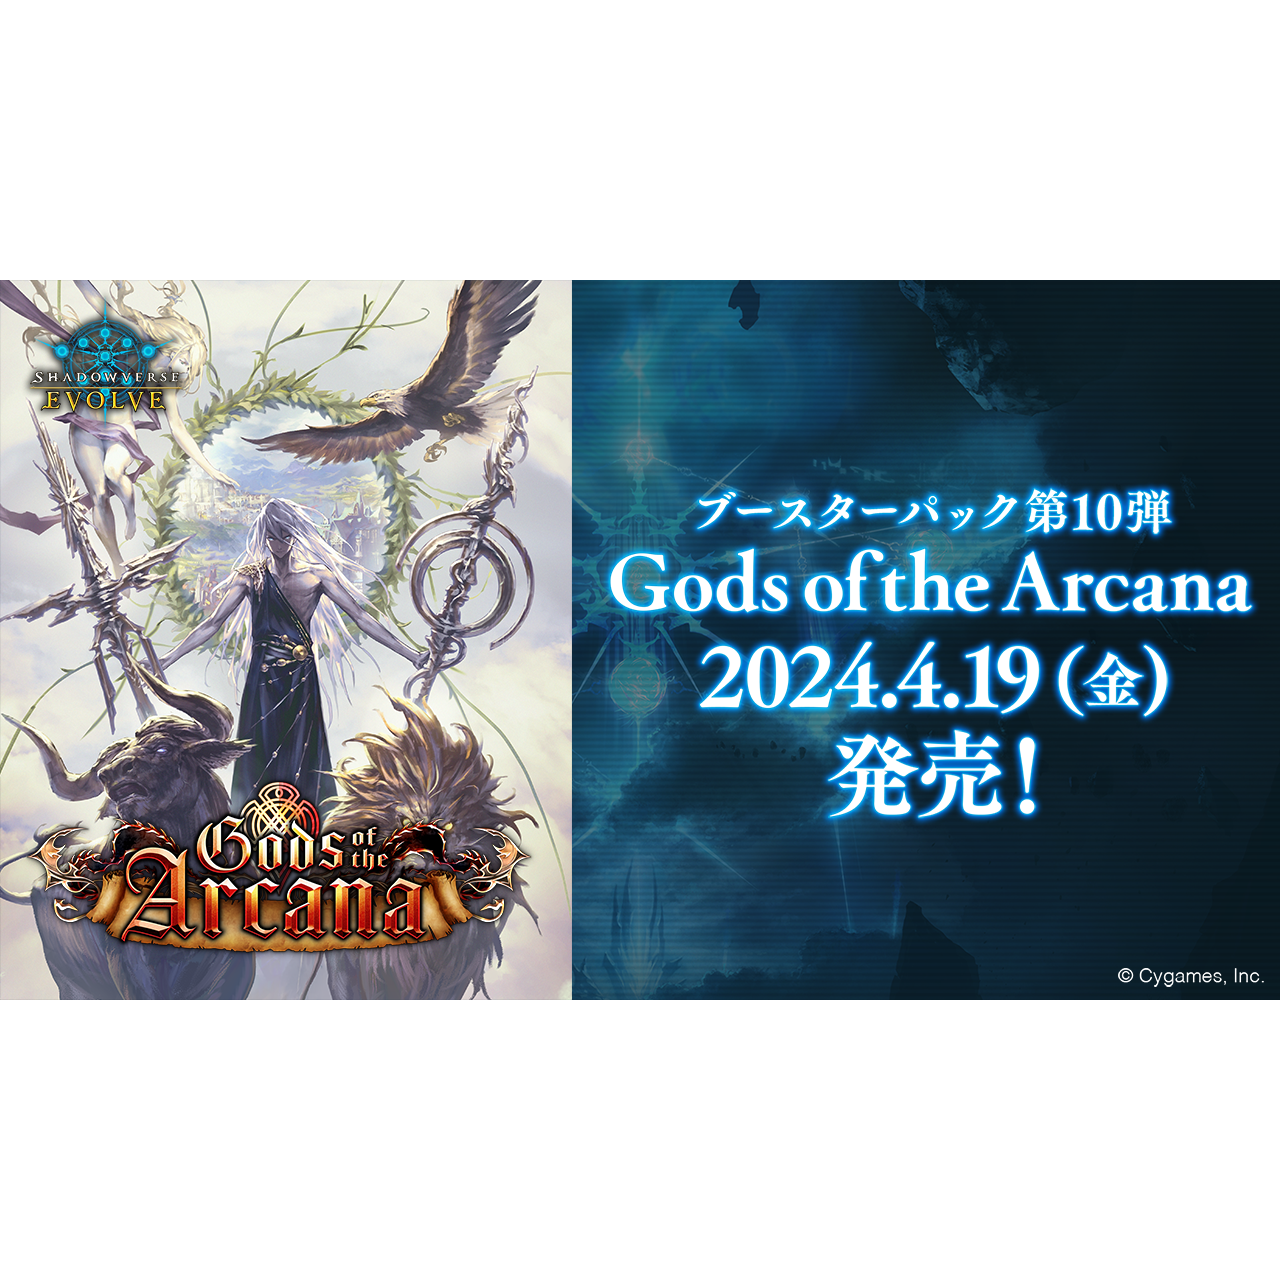 SHADOWVERSE EVOLVE Booster Pack 第10弾 ｢Gods of the Arcana｣ Box